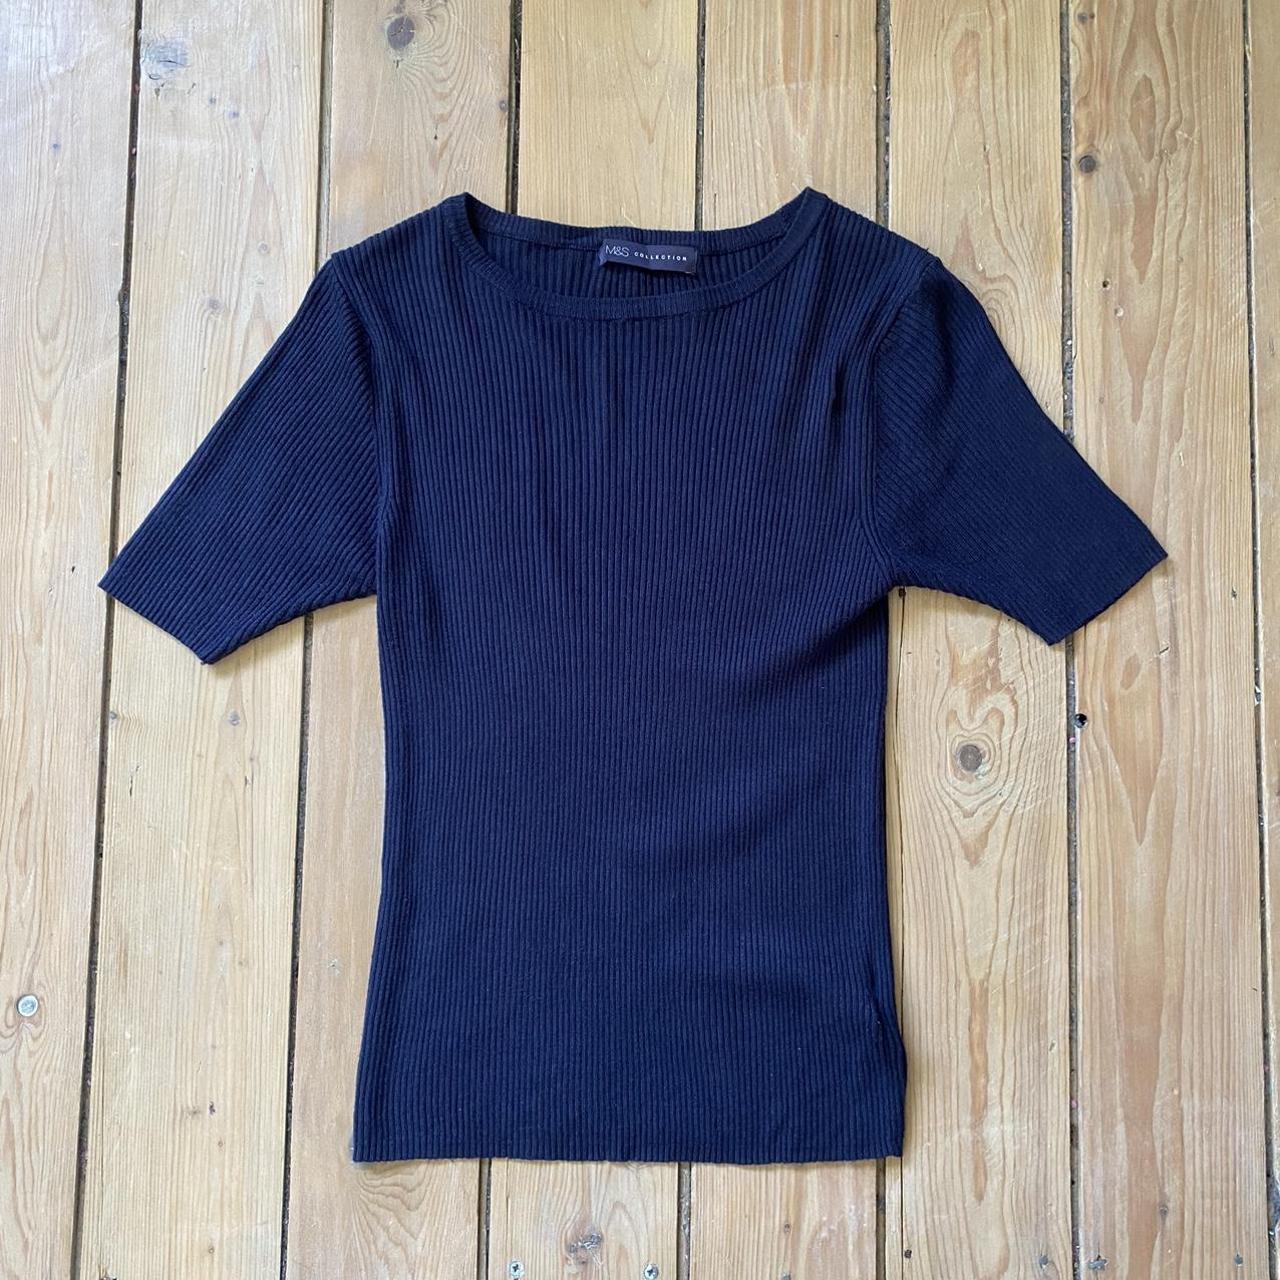 Skinny ribbed t-shirt style top, round neck. M&S,... - Depop